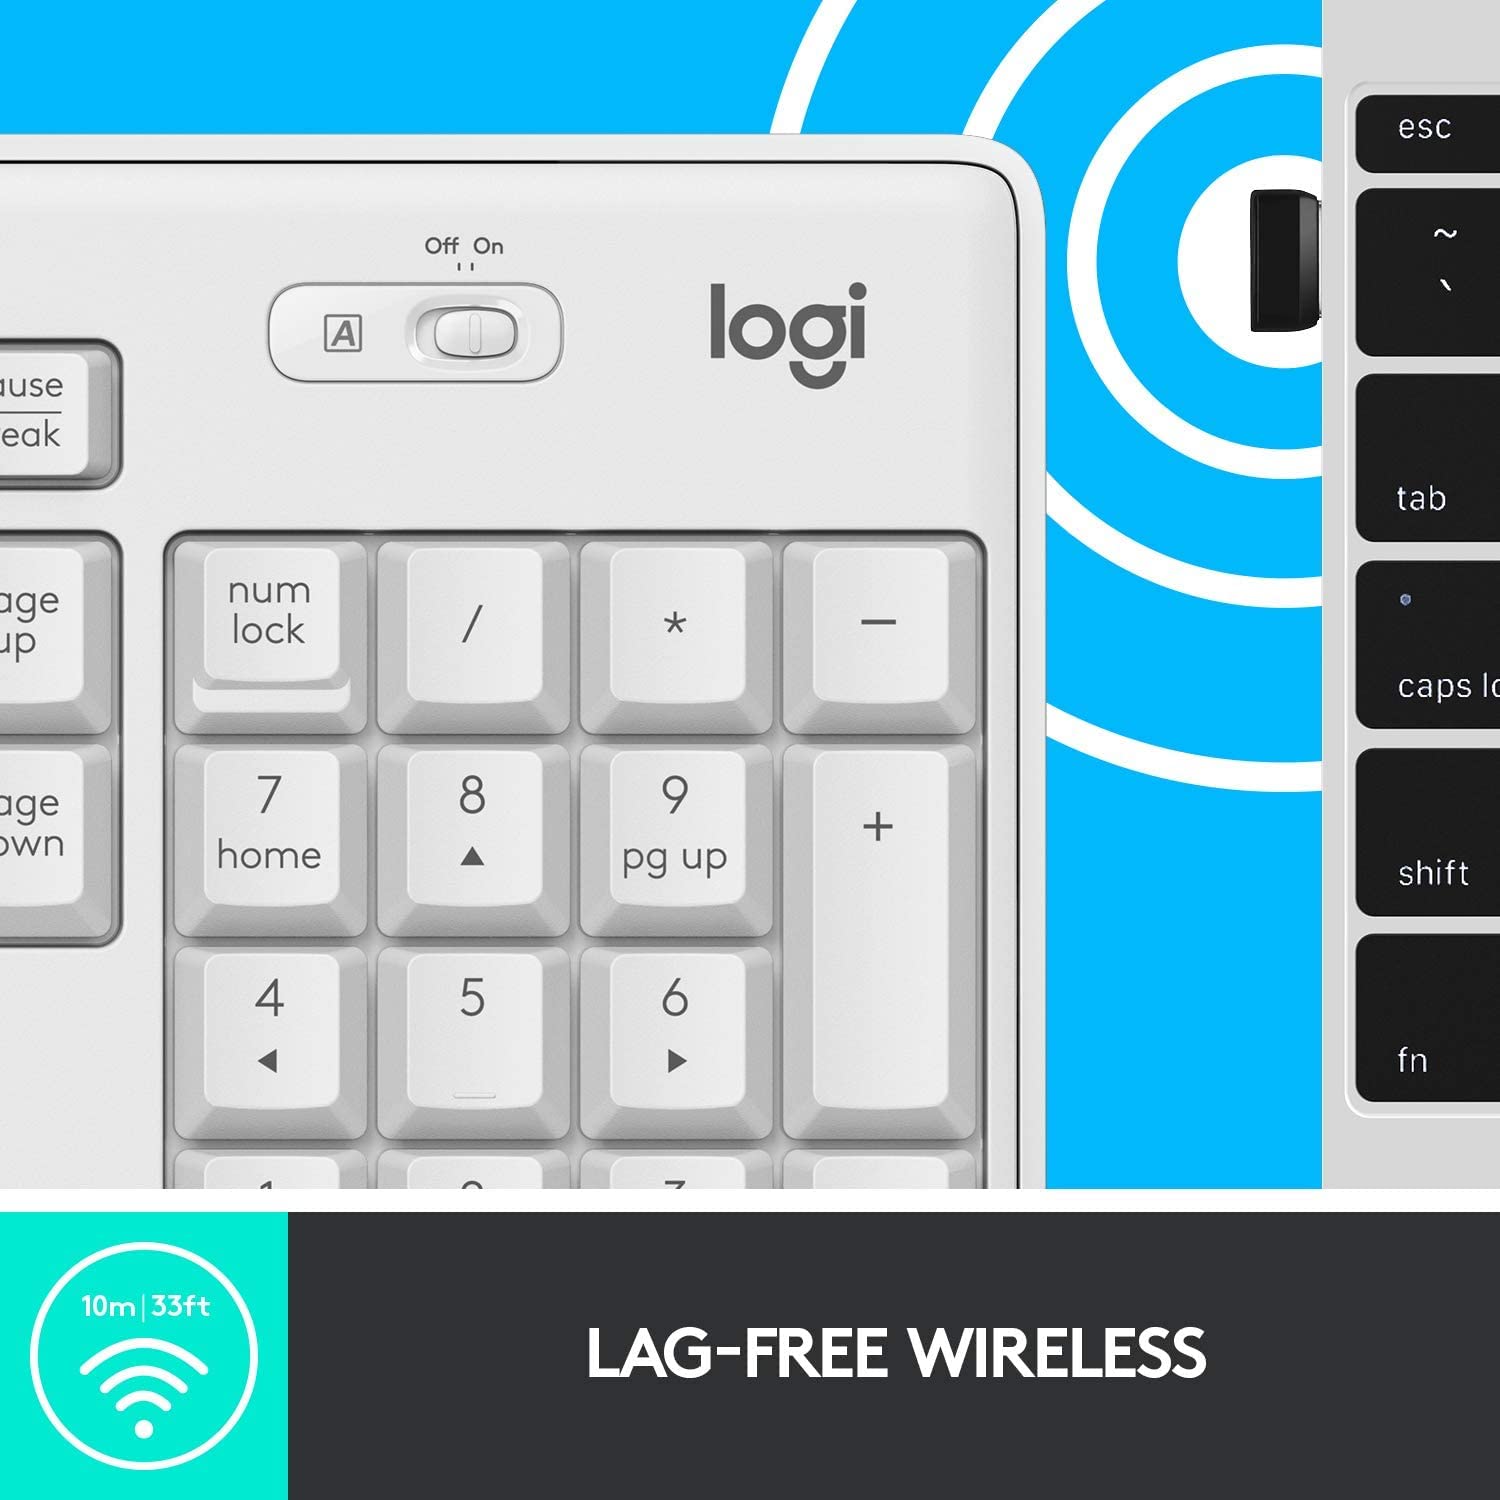 Logitech MK295 Wireless Mouse & Keyboard Combo with SilentTouch Technology, Full Numpad, Advanced Optical Tracking, Lag-Free Wireless, 90% Less Noise - Off White (Renewed)